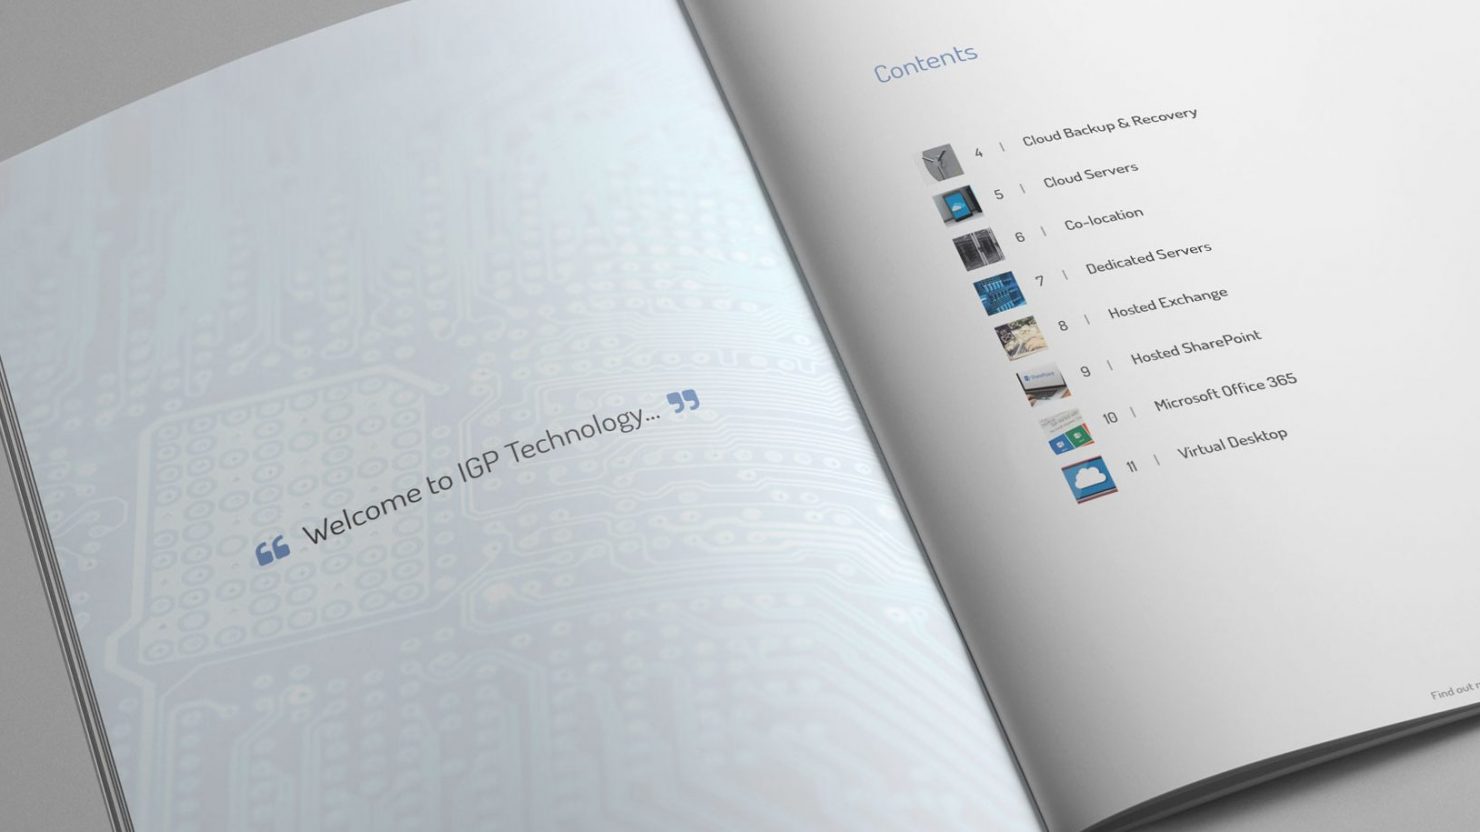 brochure design and branding example for IGP technology birmingham